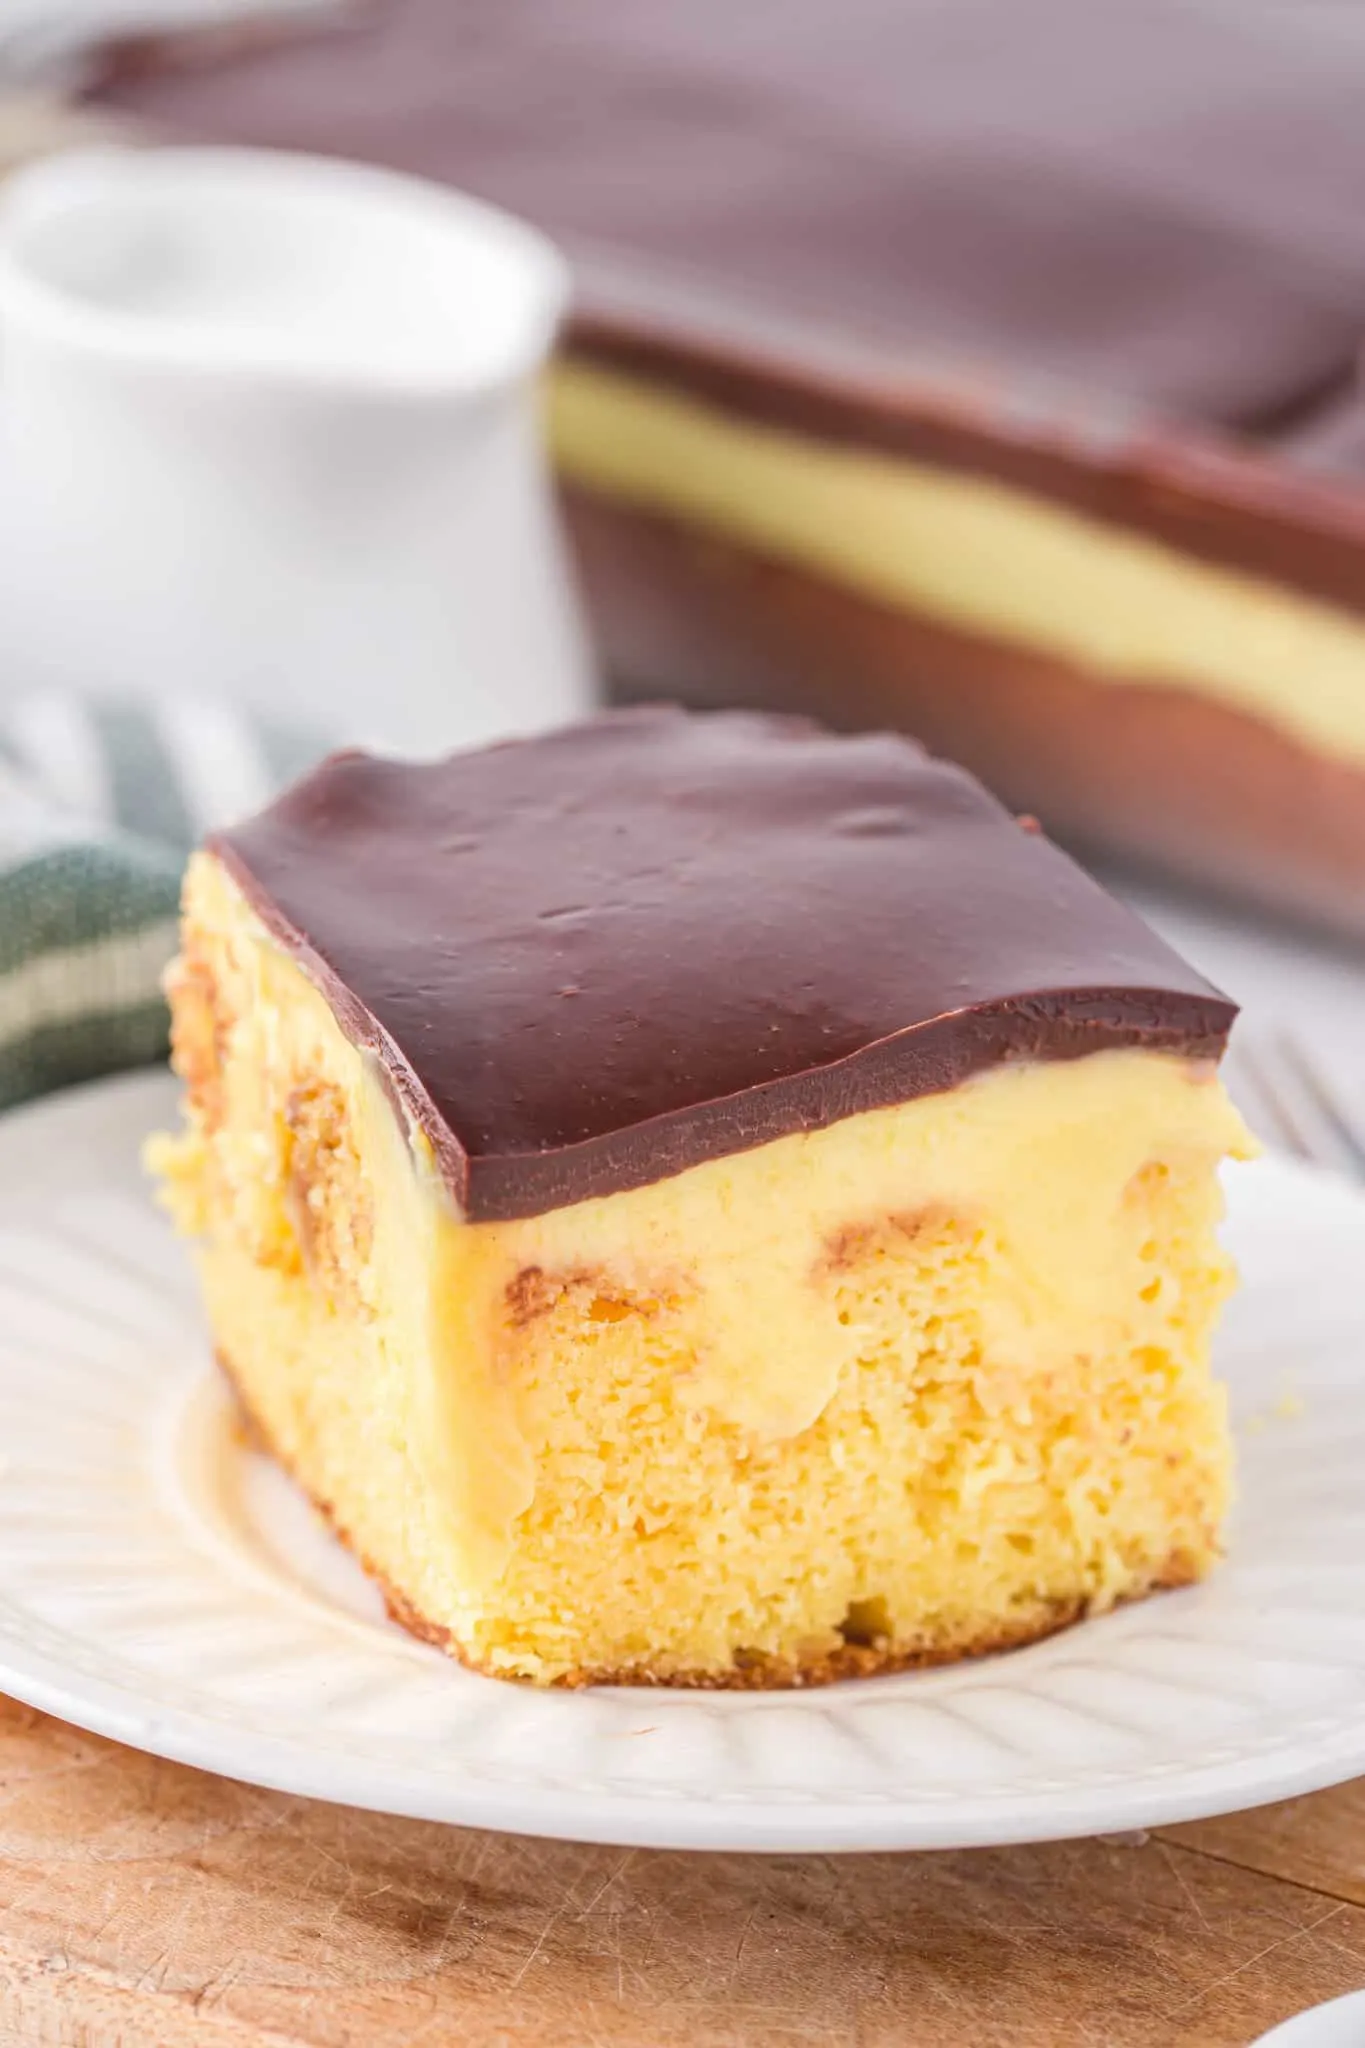 Boston Cream Poke Cake is a moist and delicious dessert recipe made with boxed yellow cake mix covered in creamy vanilla pudding and topped with chocolate ganache.